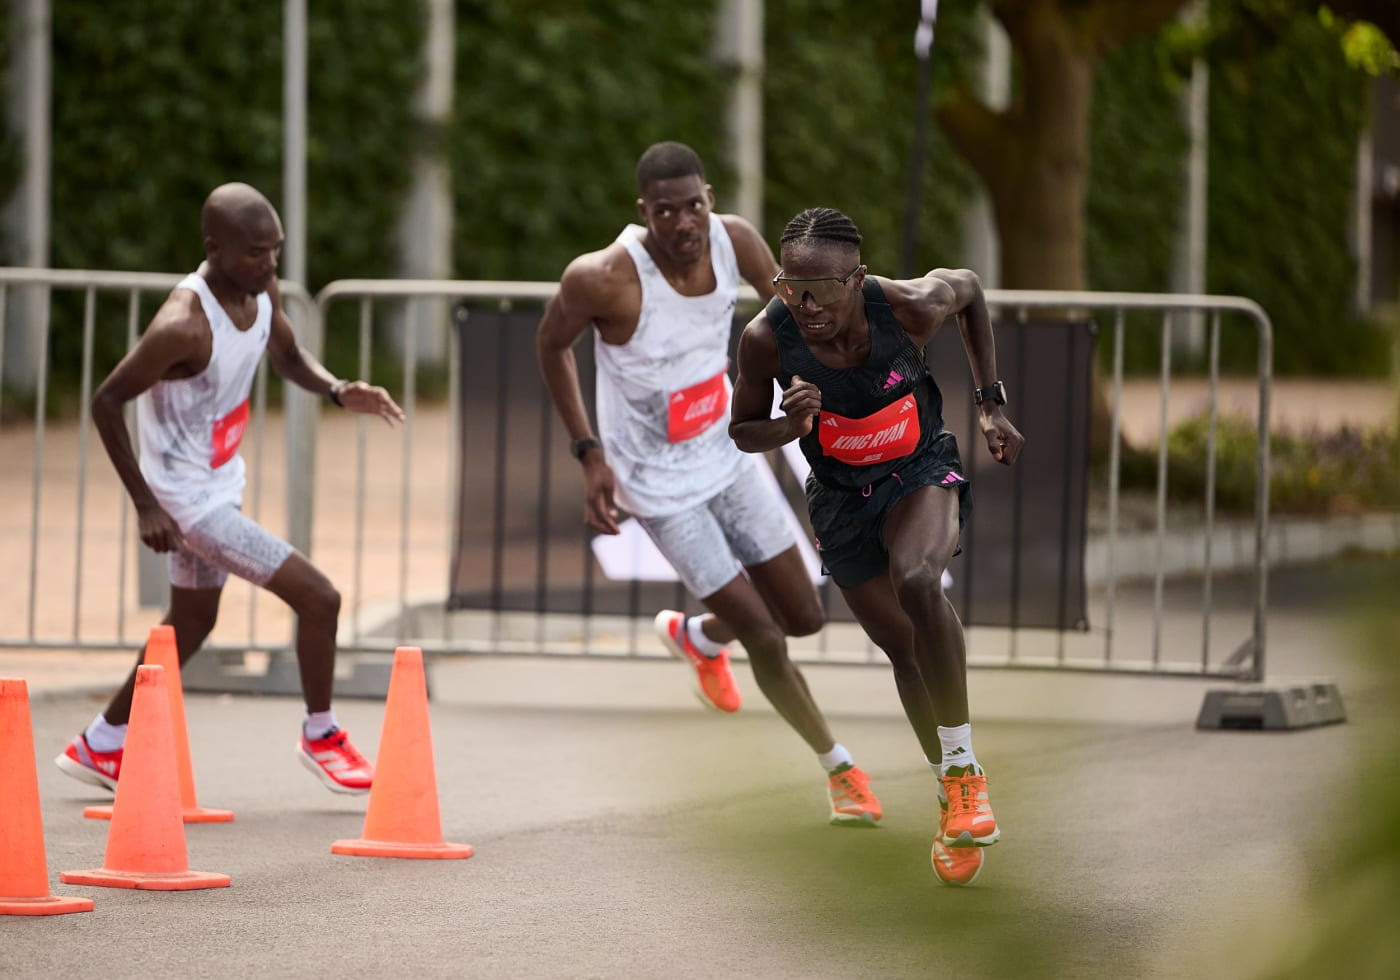 Image showing male racers competing in a marathon. They are all wearing Adizero Adios Pro 3 shoes.